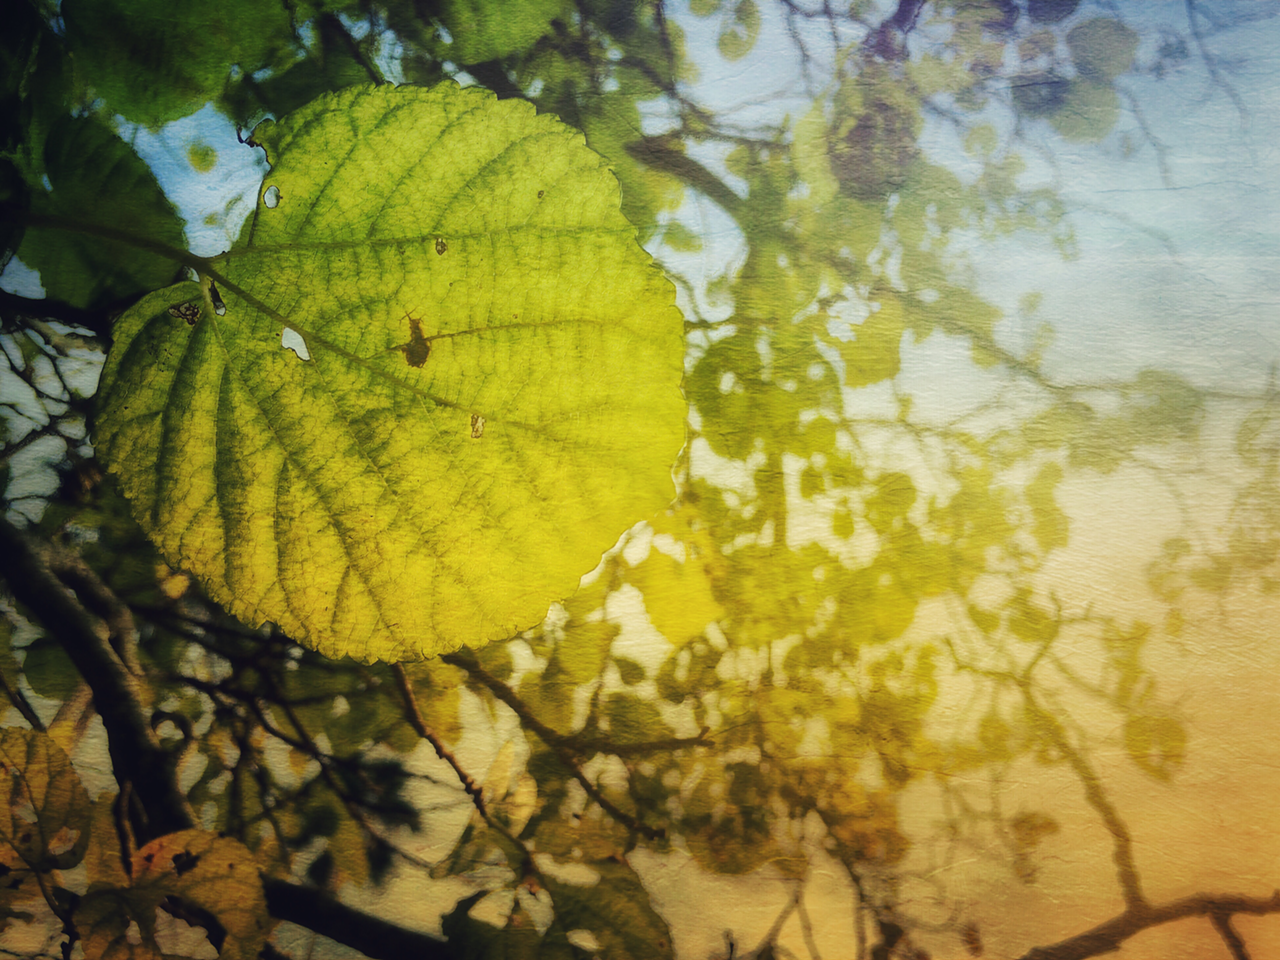 Leaf on a tree (apps: ProCamera, Mextures, XnView Photo FX).